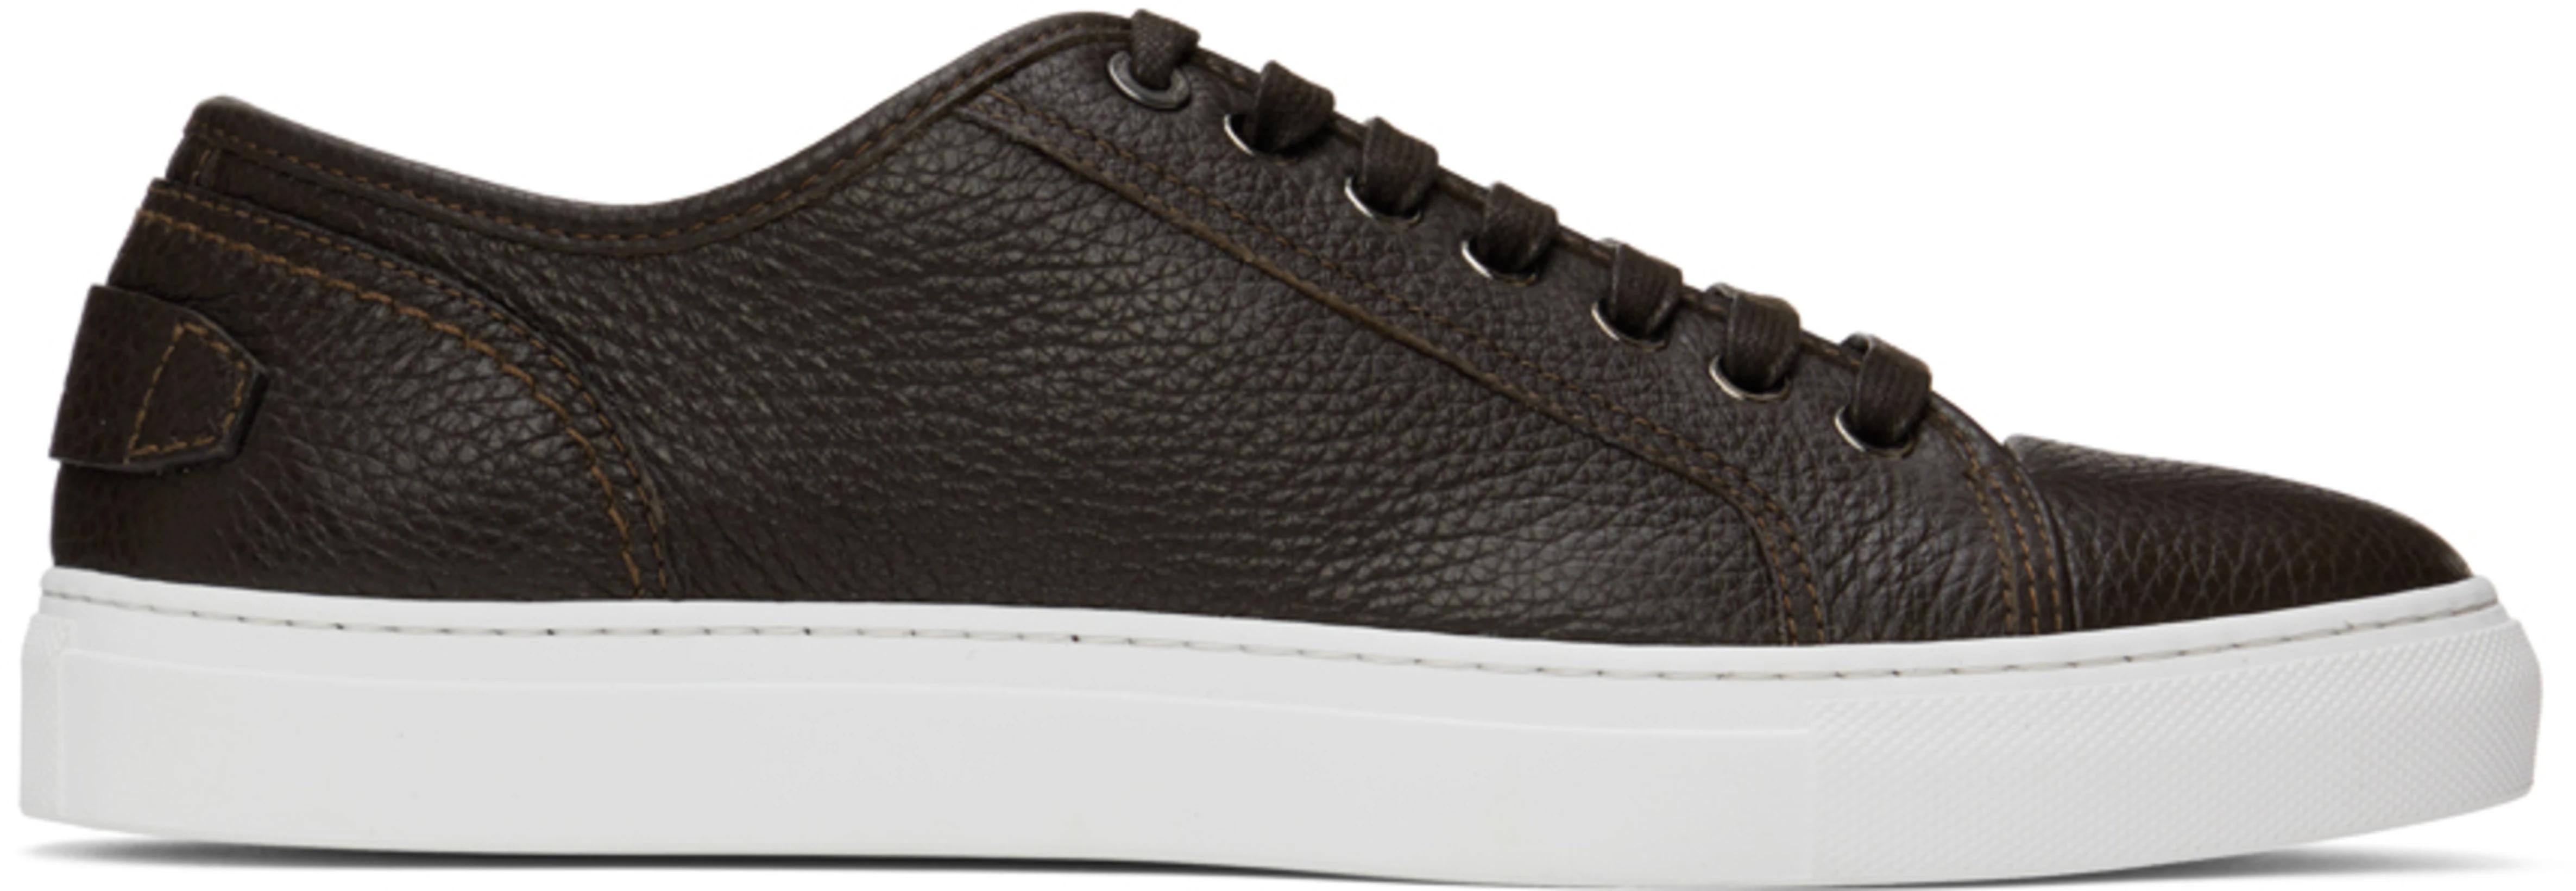 Brown Leather Sneakers by BRIONI